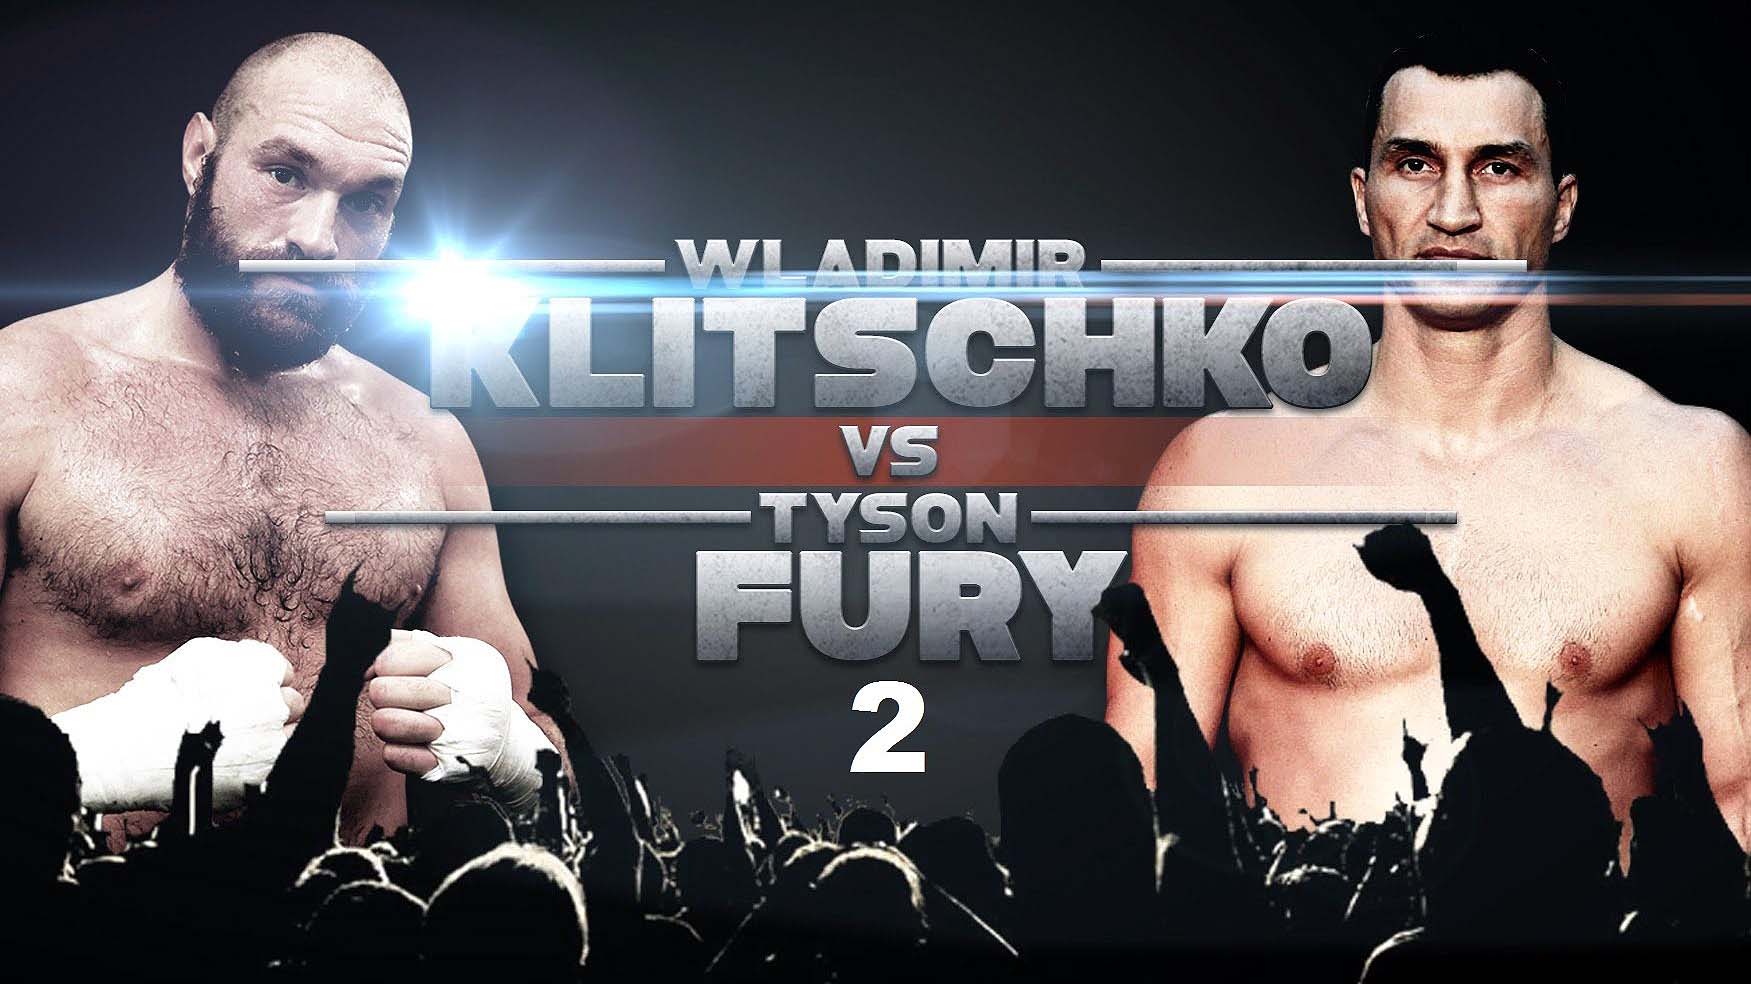 Klitschko released a video via Twitter to announce he is taking Fury to court.